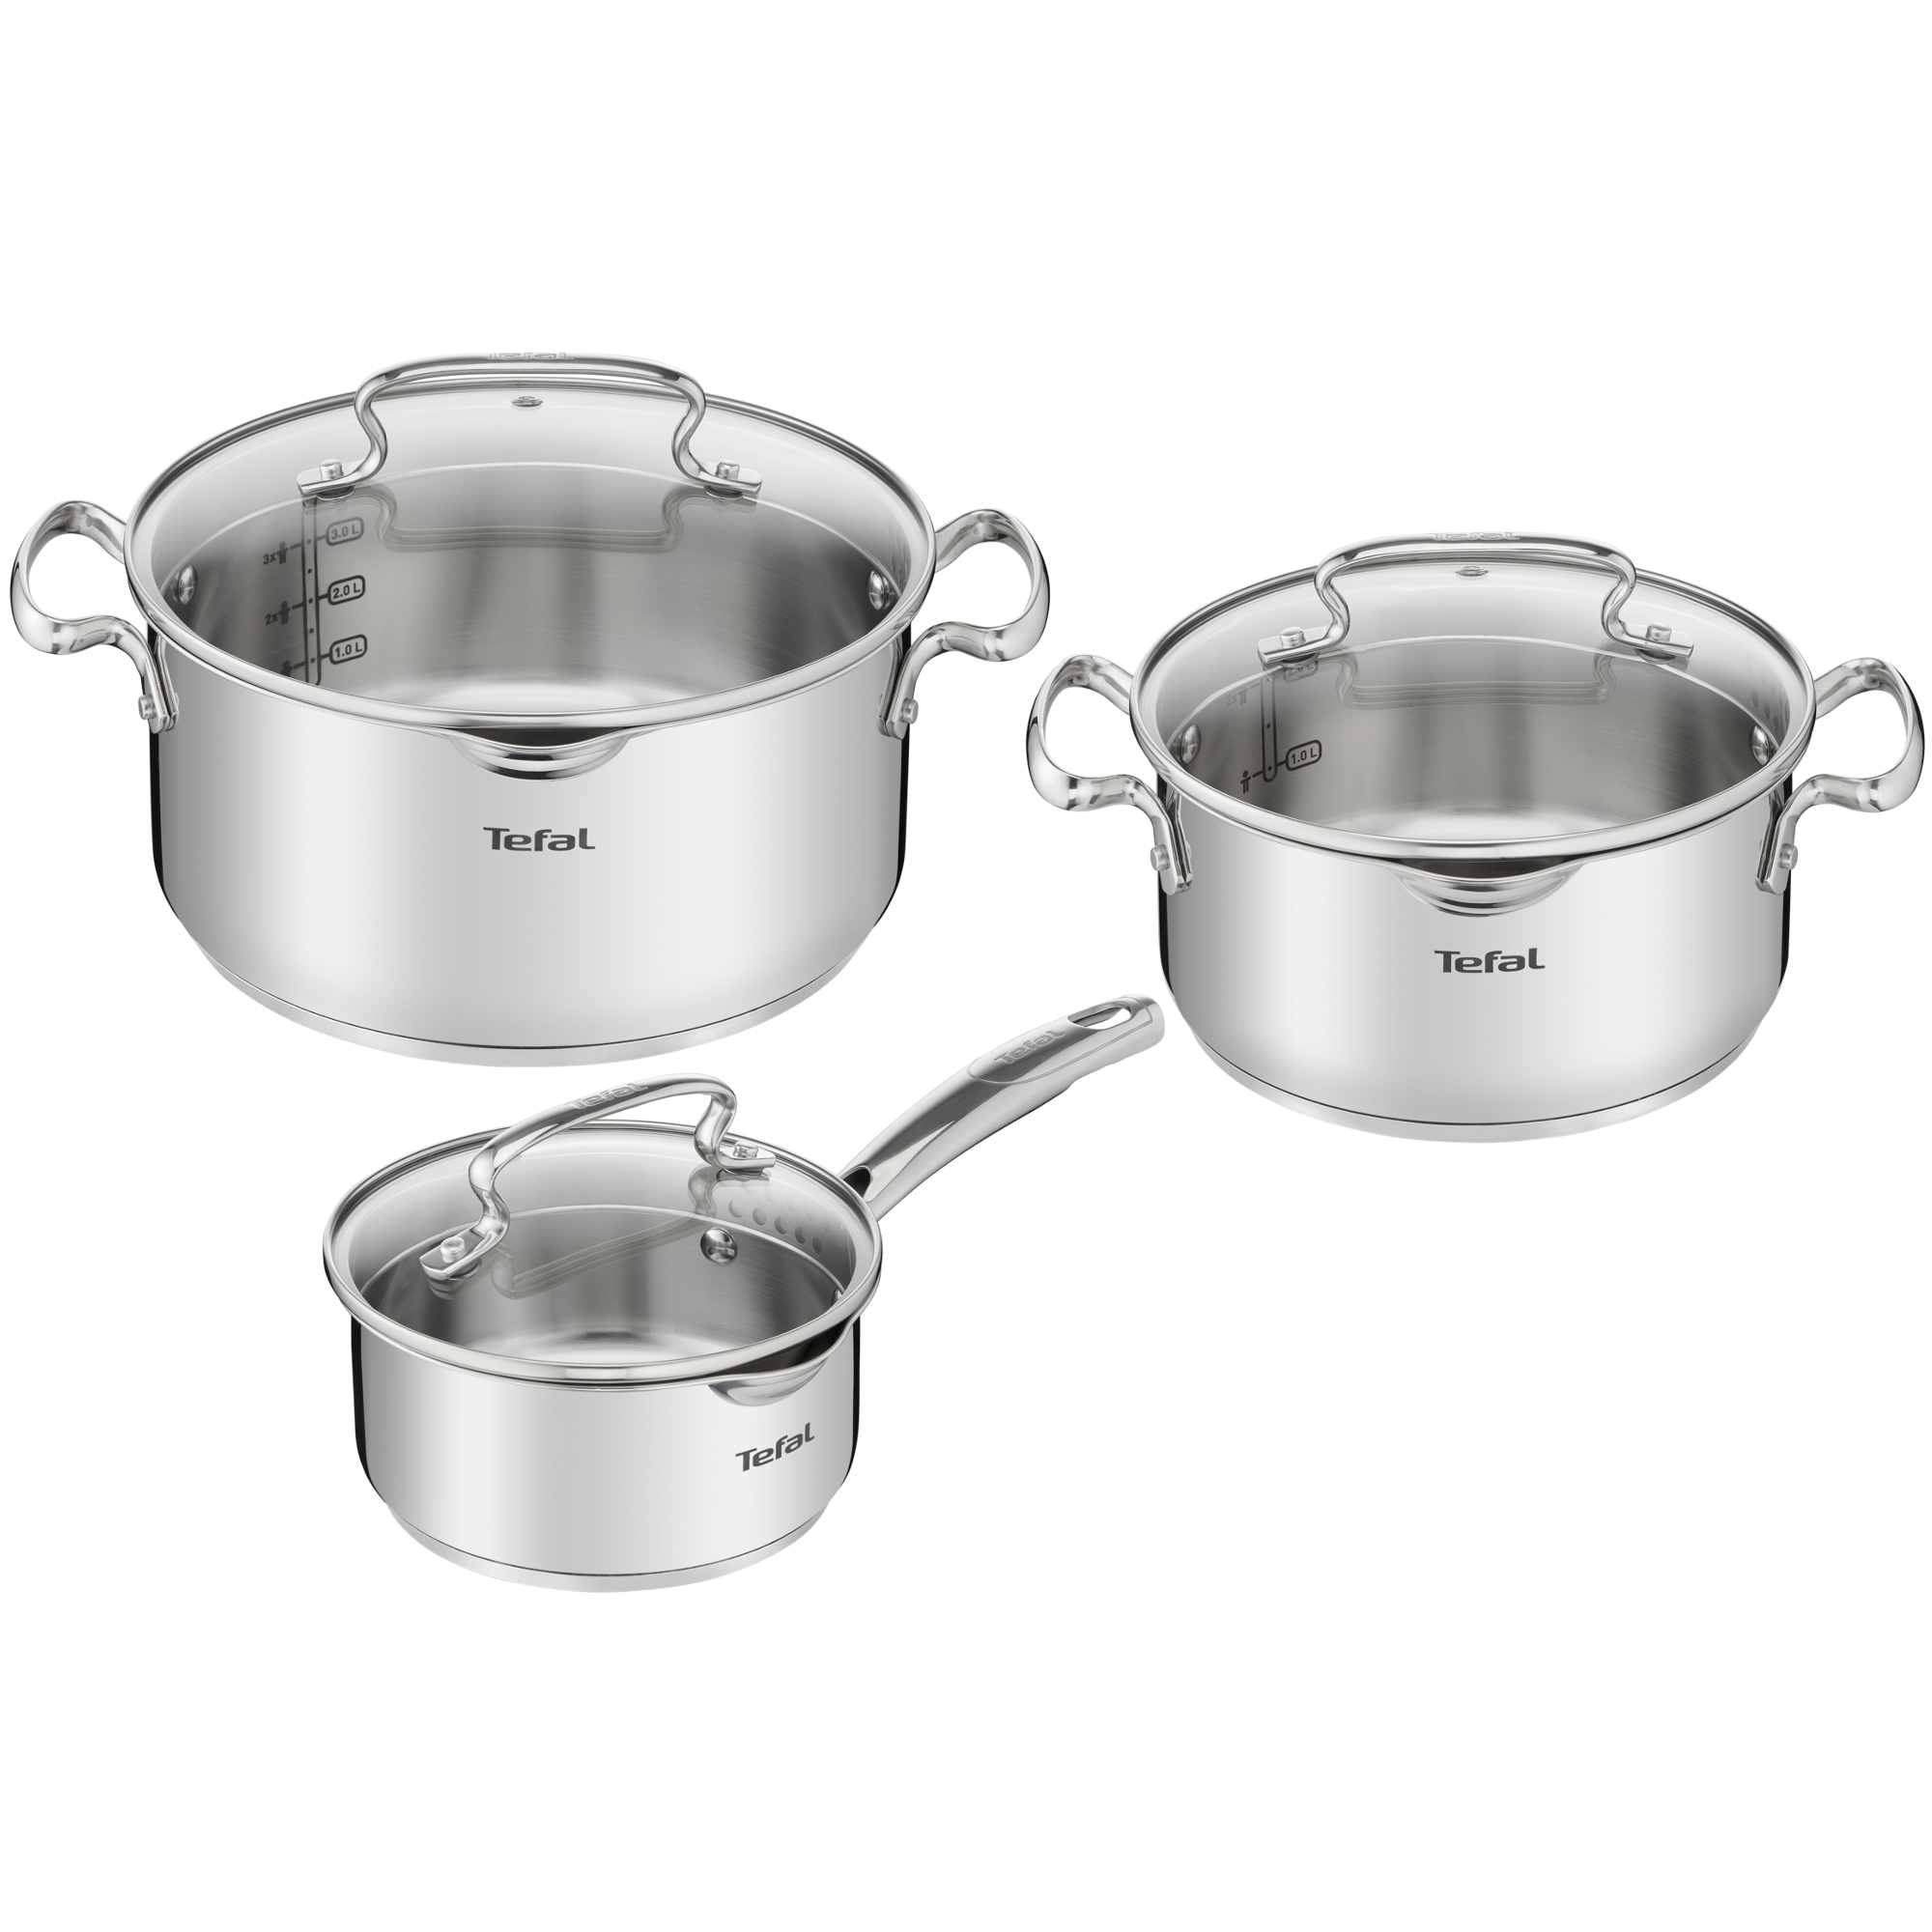 Set of 6 stainless steel pieces (1 saucepan with lid 16 cm + 1 pot with lid 20 cm + 1 pot with lid 20 cm) Tefal